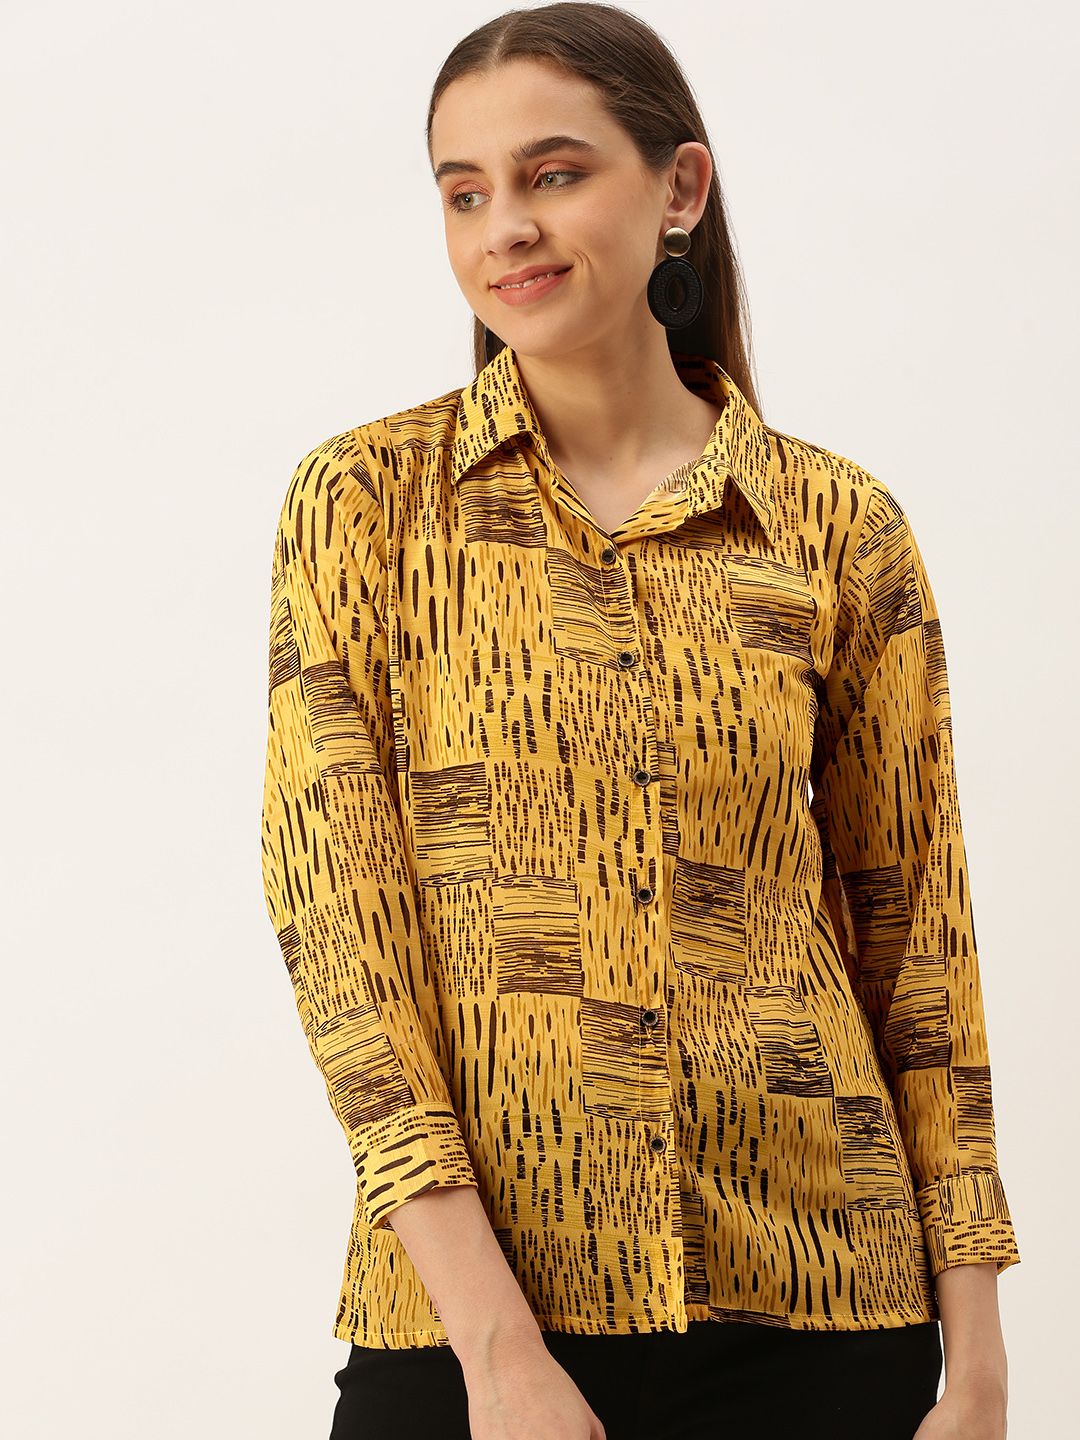 MELOSO Mustard Yellow & Black Print Georgette Shirt Style Top Price in India